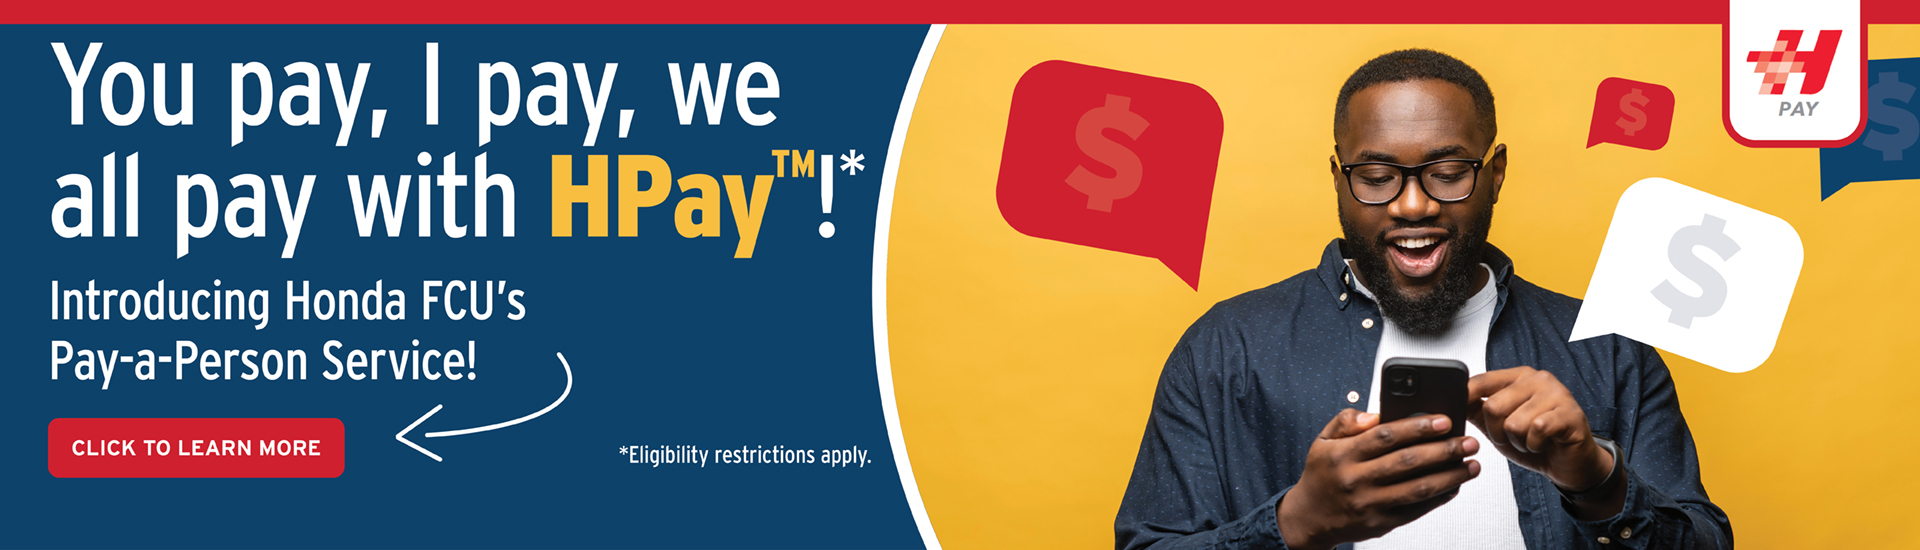 Refer new members to us and you'll both get $100.